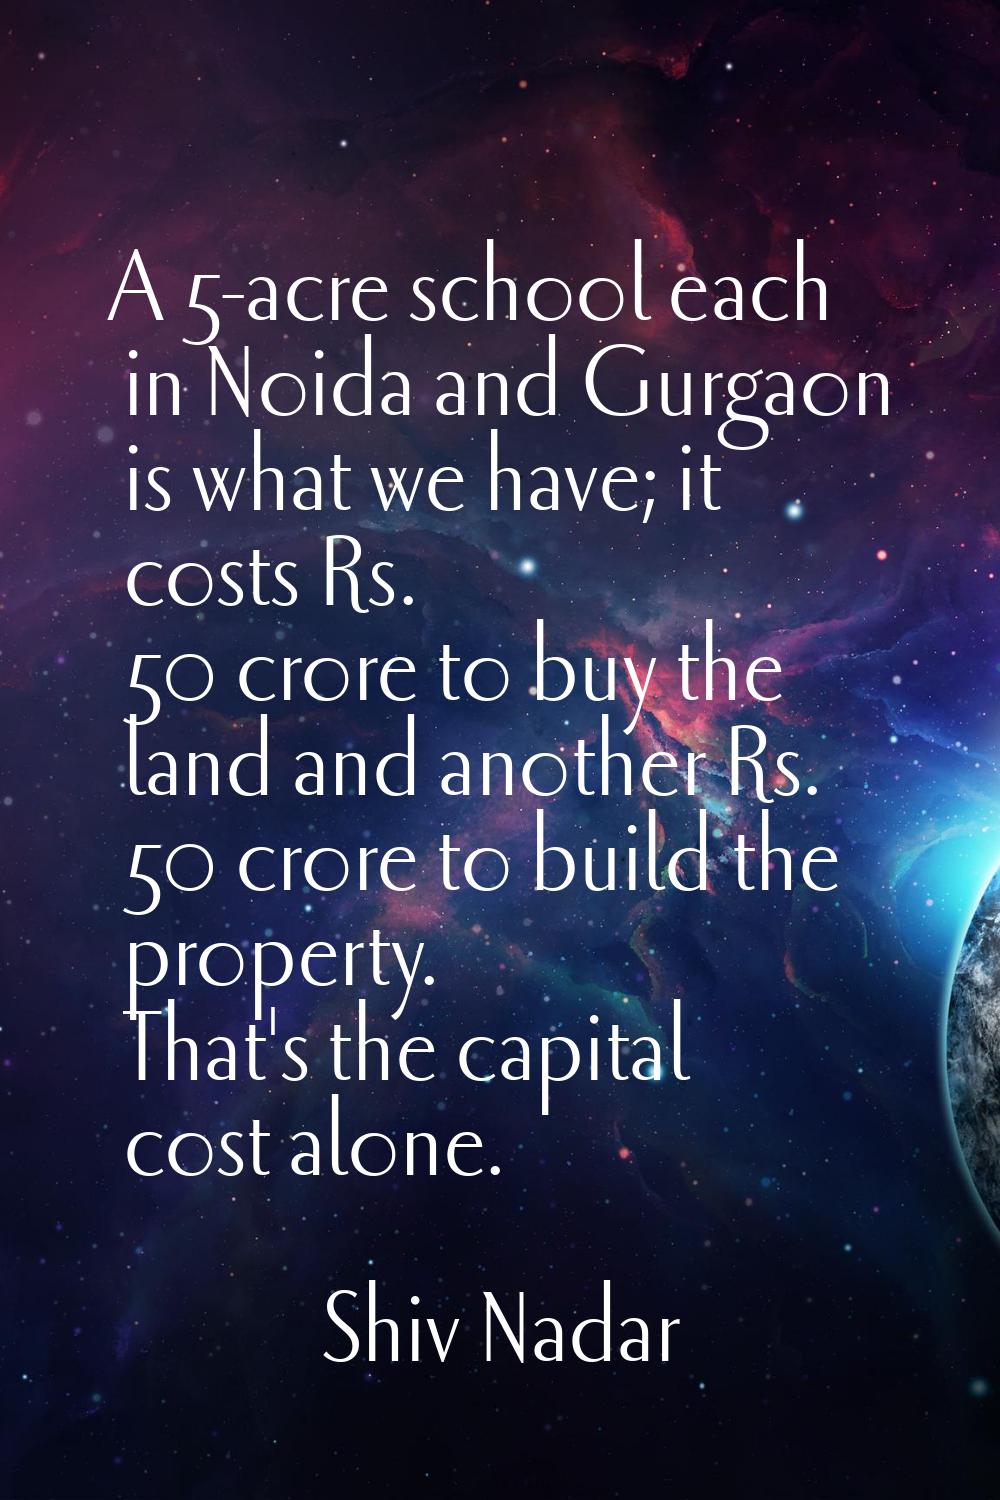 A 5-acre school each in Noida and Gurgaon is what we have; it costs Rs. 50 crore to buy the land an